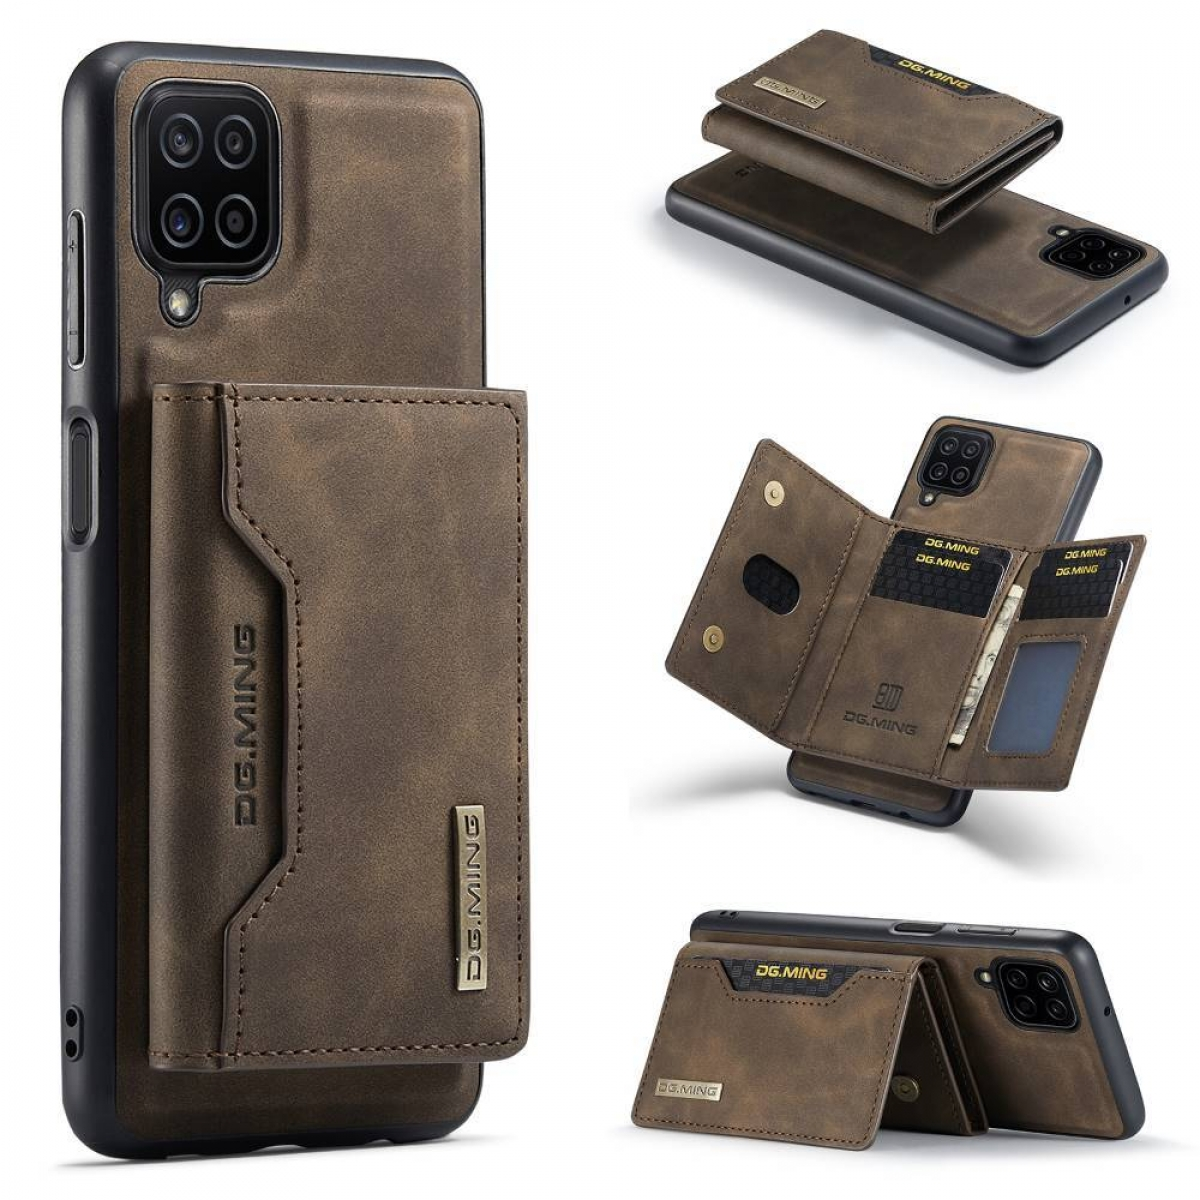 A12, MING Samsung, Backcover, Coffee Galaxy 2in1, M2 DG